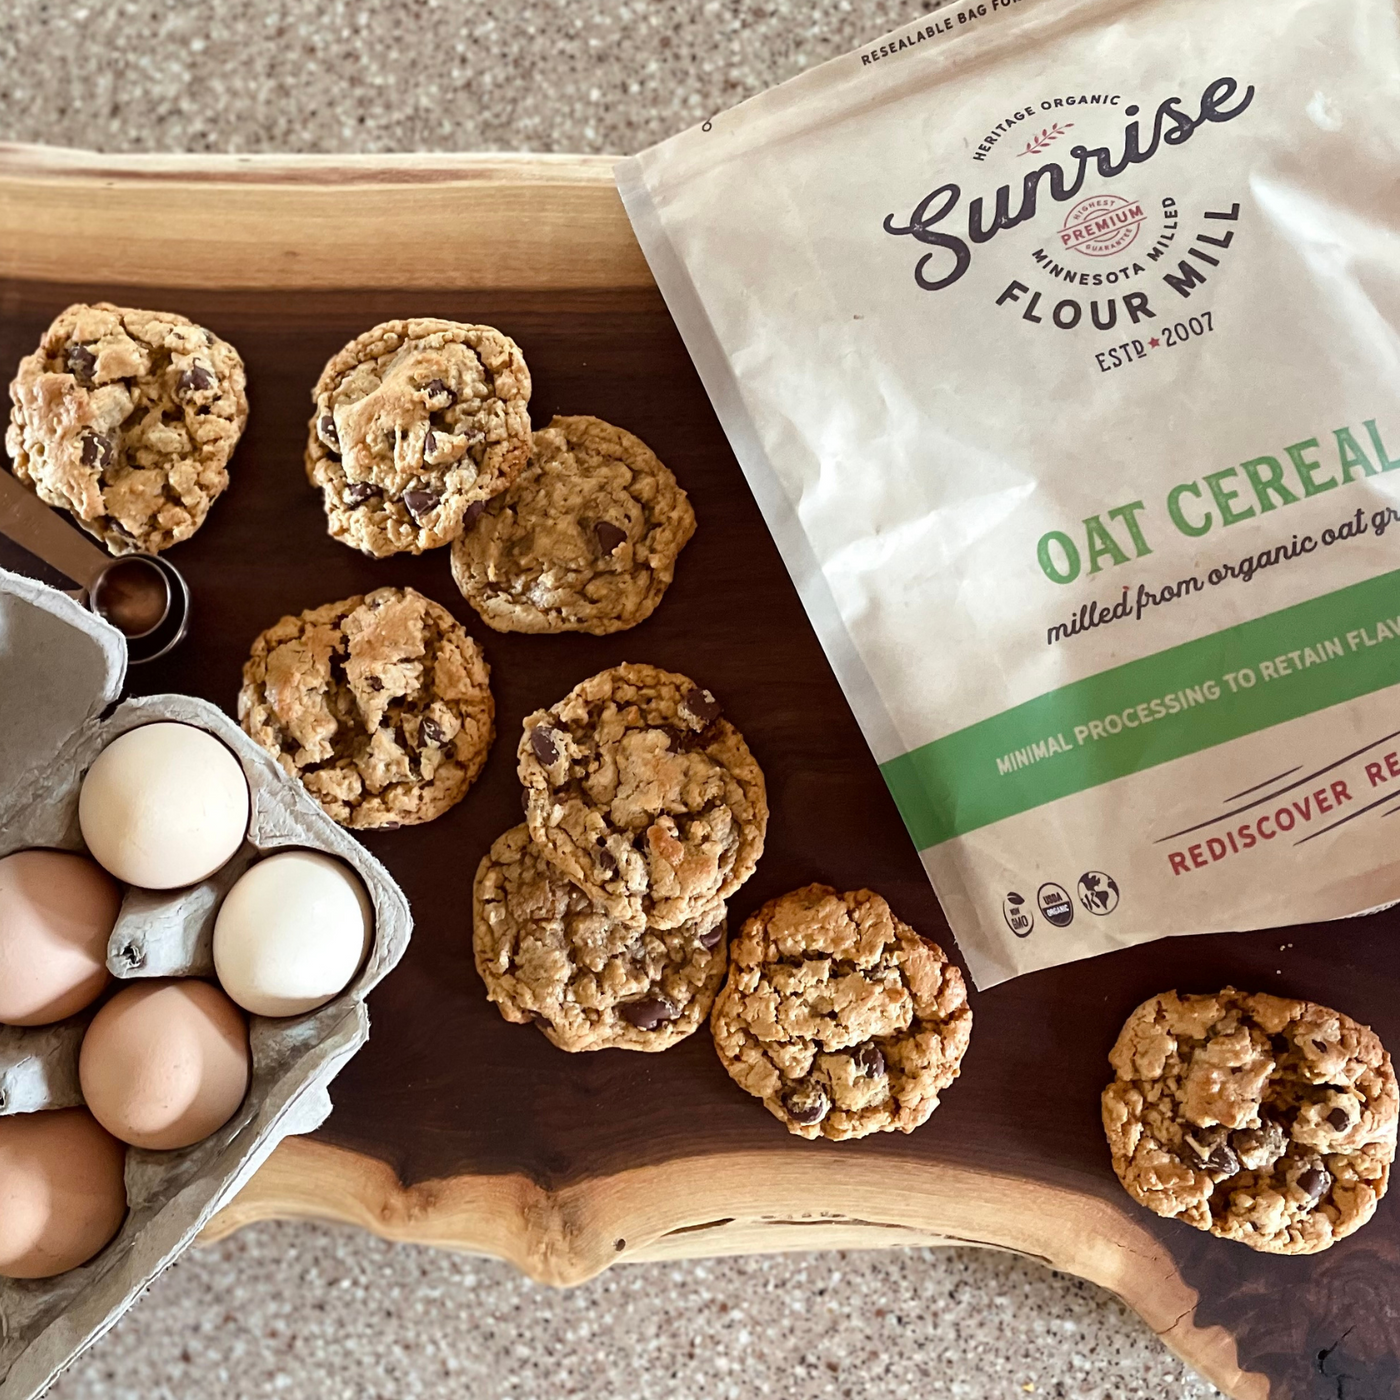 Easy Oat Cereal, Peanut Butter, Chocolate Chip Cookie Recipe